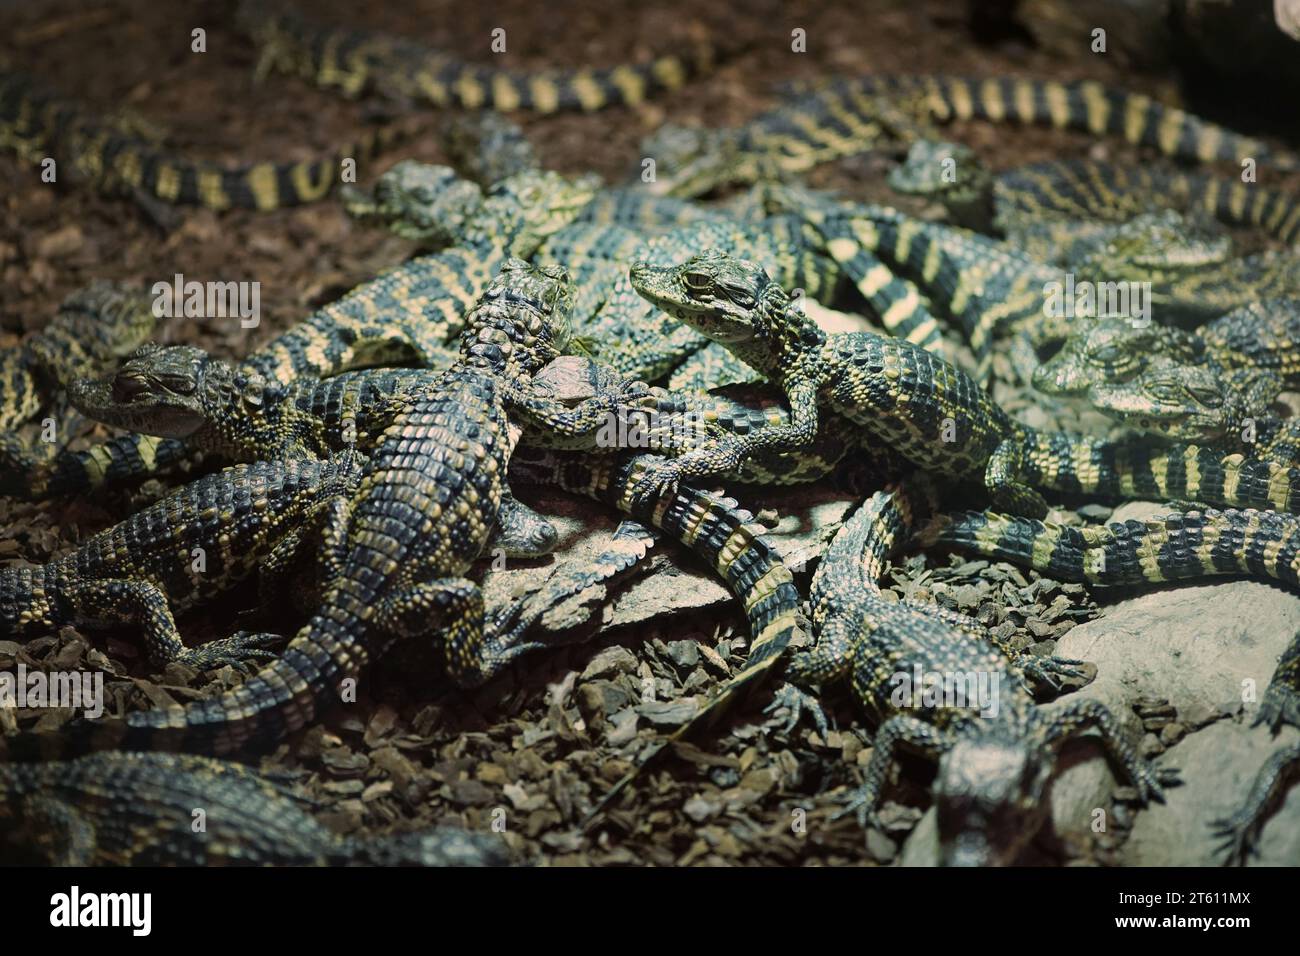 Broad-snouted caiman babies Stock Photo